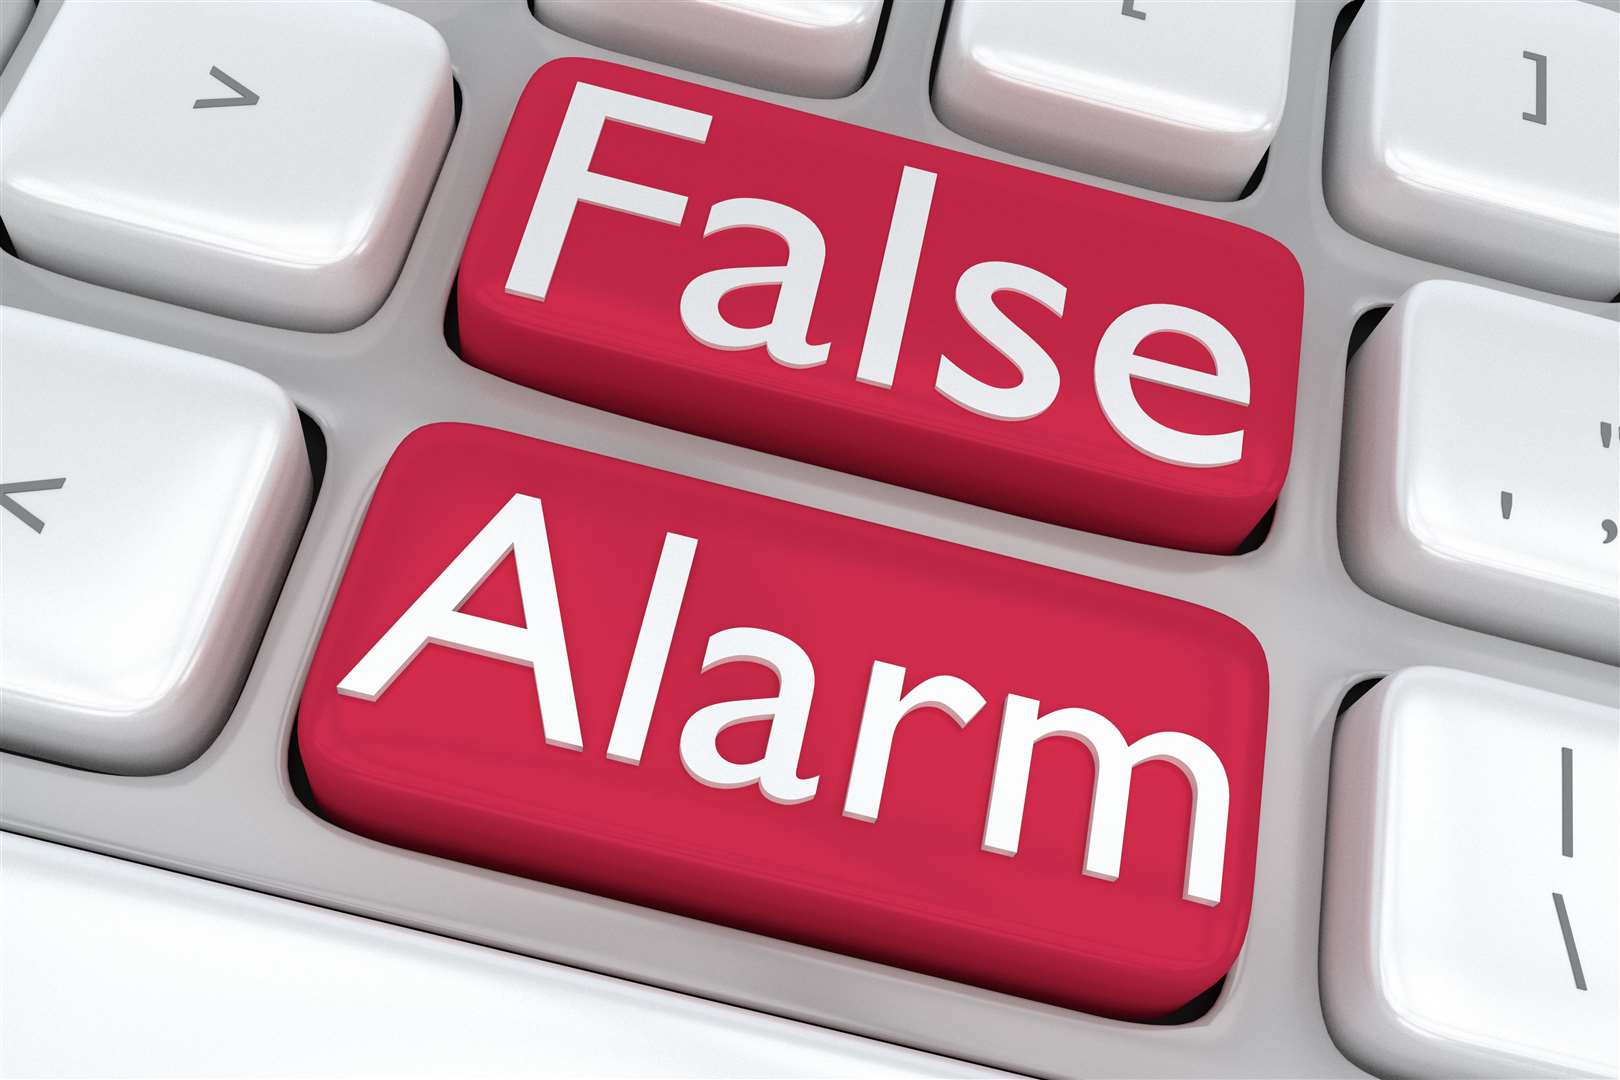 There is has been a rise in false fire alarm call-outs in Sutherland in the past six months.